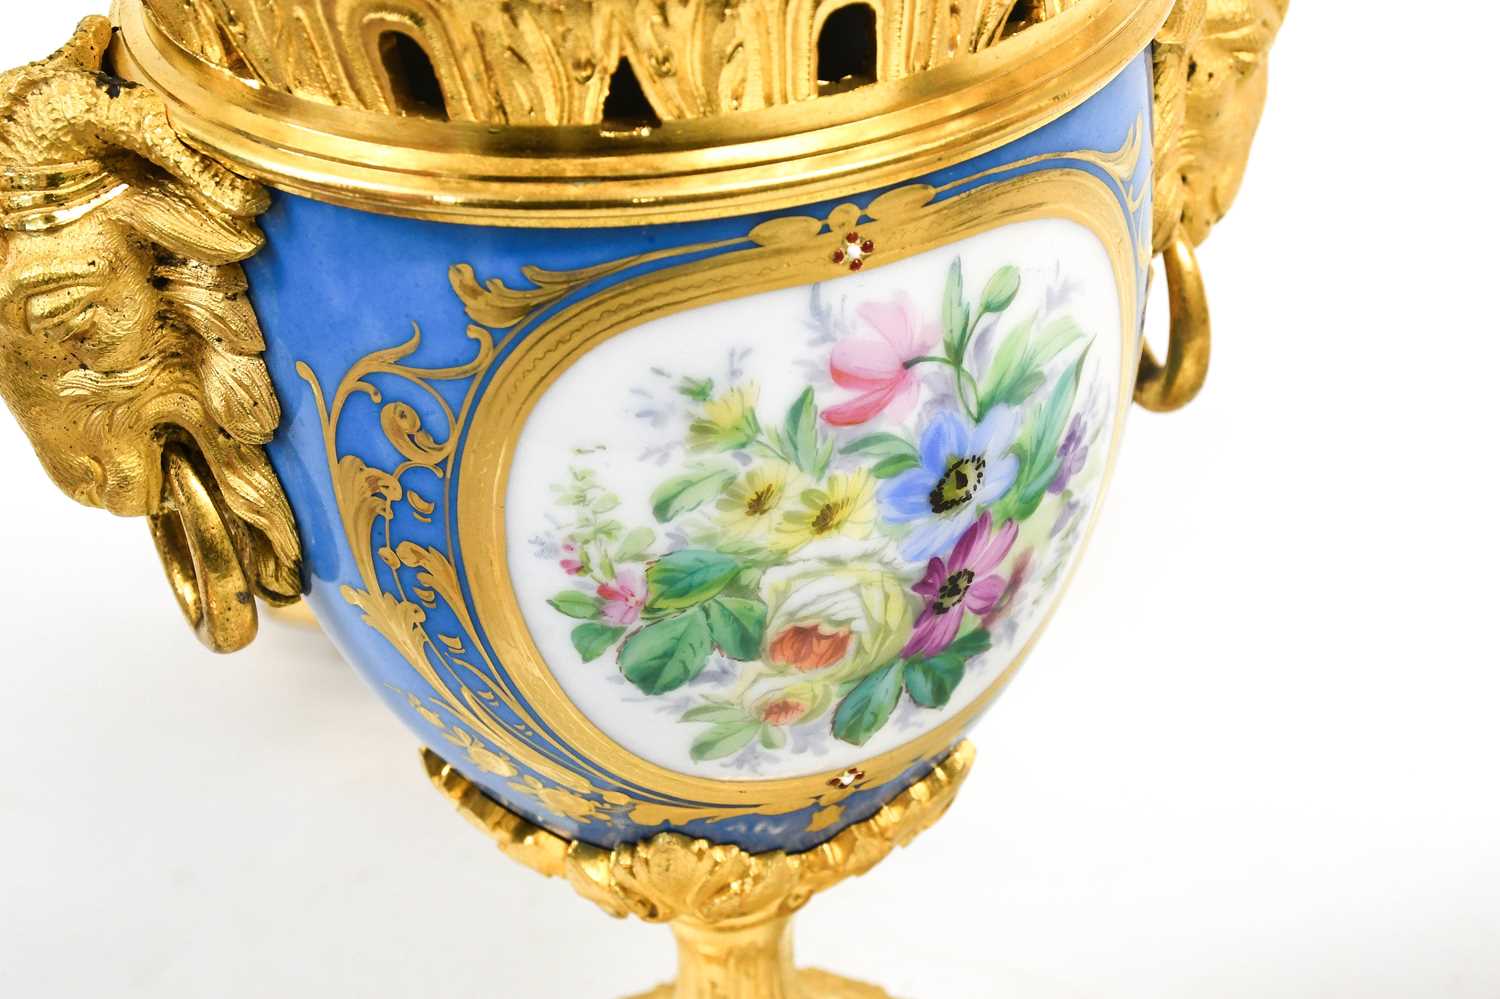 A Pair of Gilt-Metal-Mounted Sèvres-Style Porcelain Vases and Covers, 19th century, of urn shape - Image 3 of 3